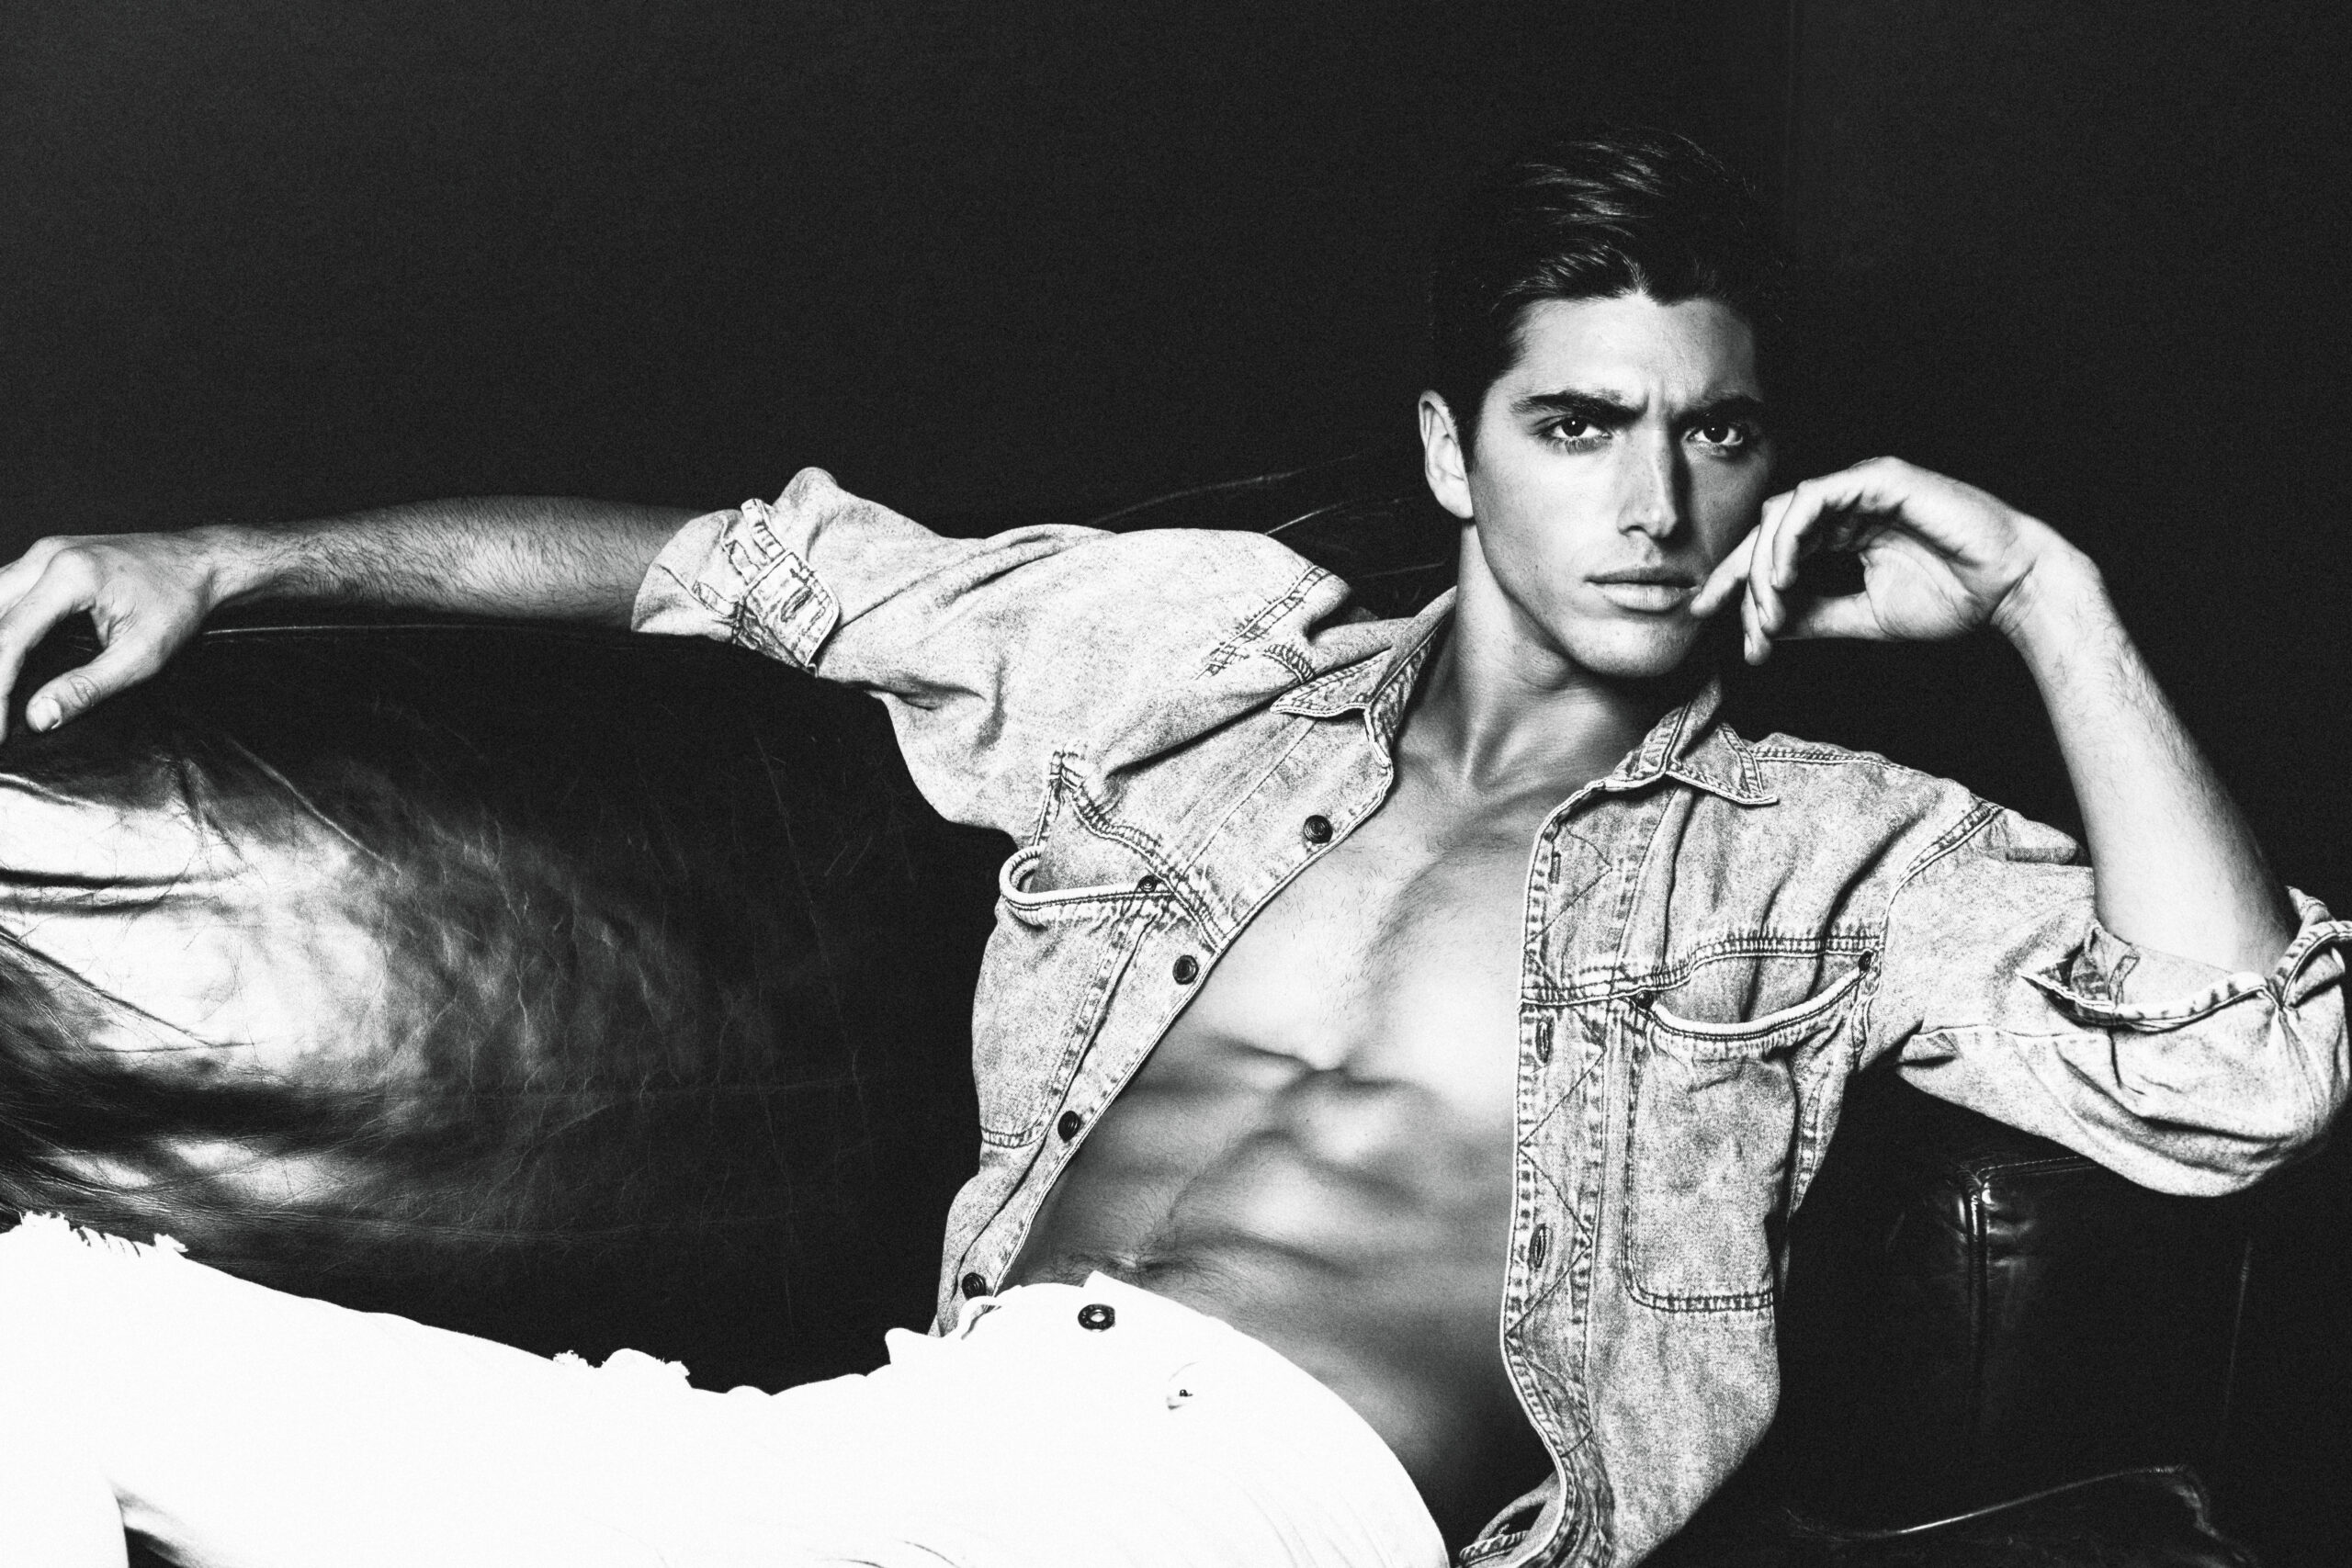 Taylor Zakhar Perez by Walid Azami, laying on a leather couch